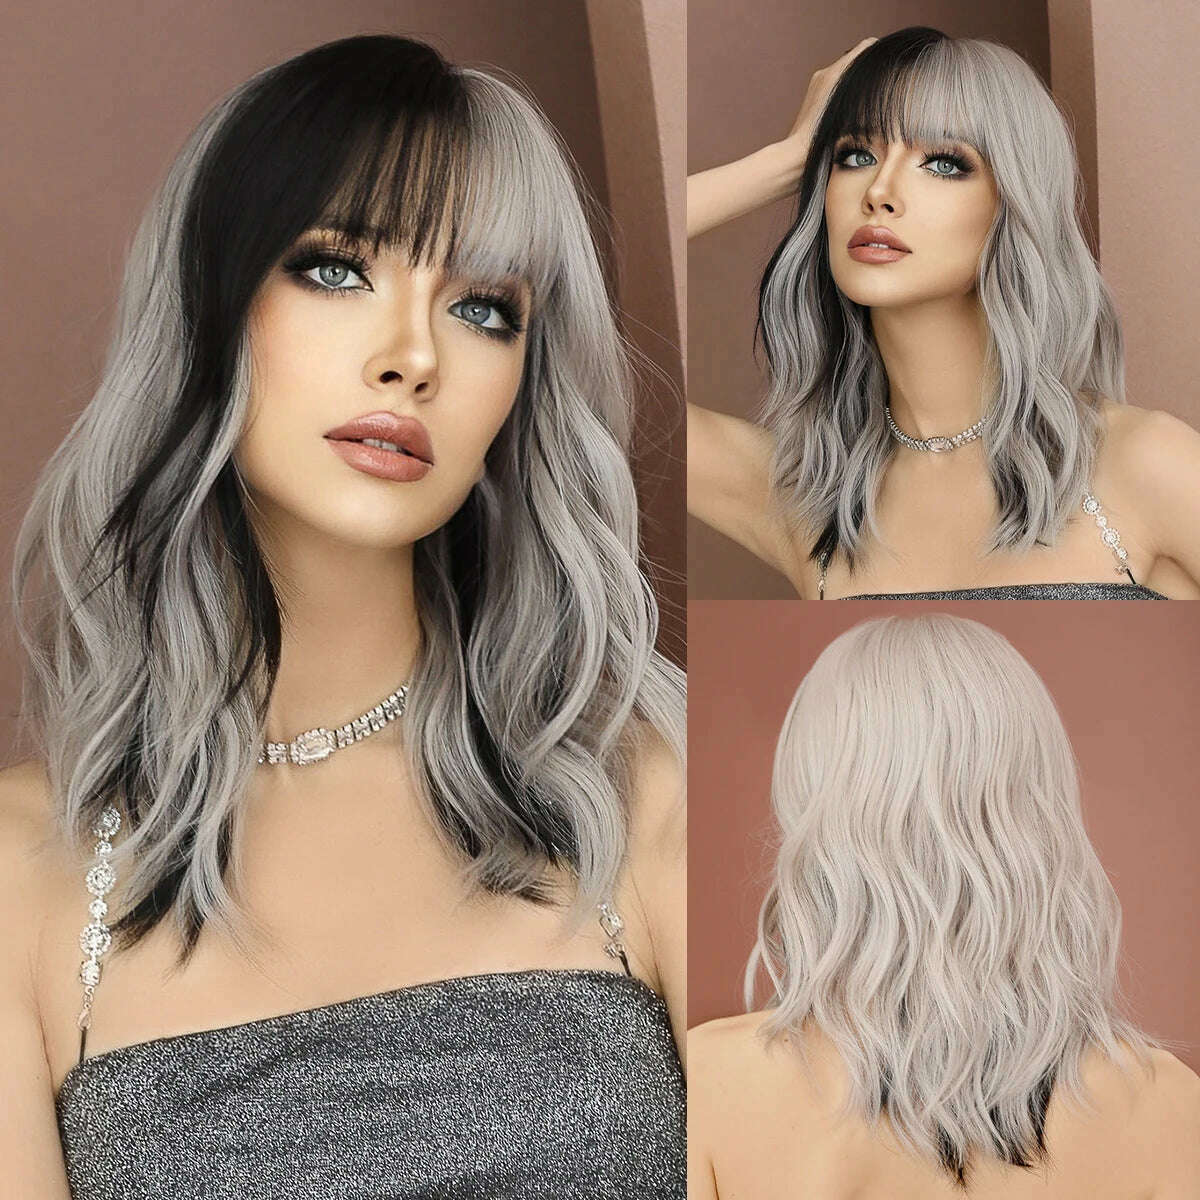 KIMLUD, NAMM Silver black Wavy Wig for Woman Daily Party Cosplay Middle Part Natural Synthetic Hair Wig Heat Resistant Fiber, KIMLUD Womens Clothes